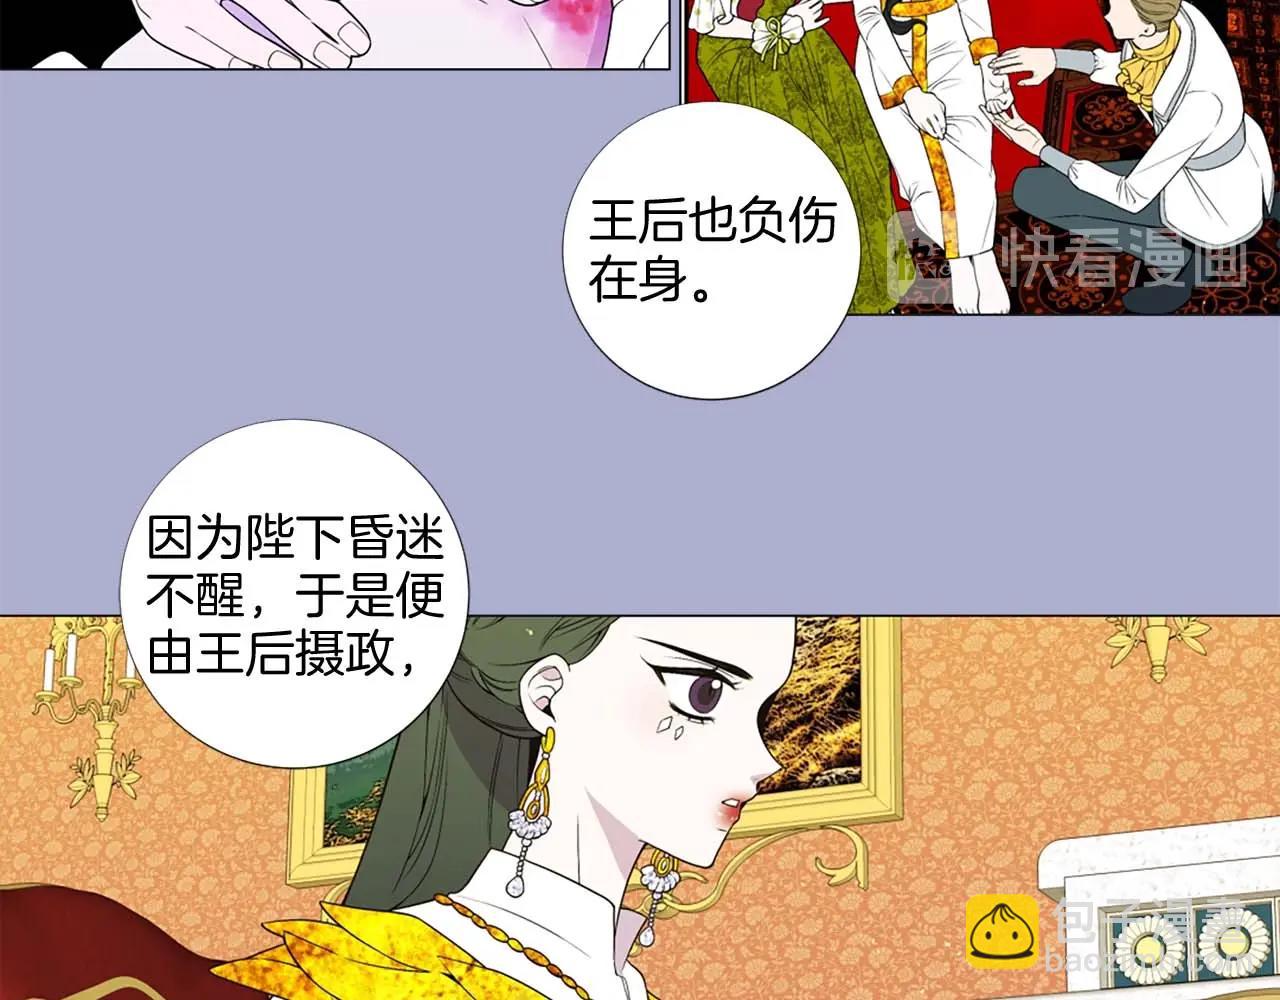 Lady to Queen-勝者爲後 - 第39話 證據確鑿！(1/3) - 2